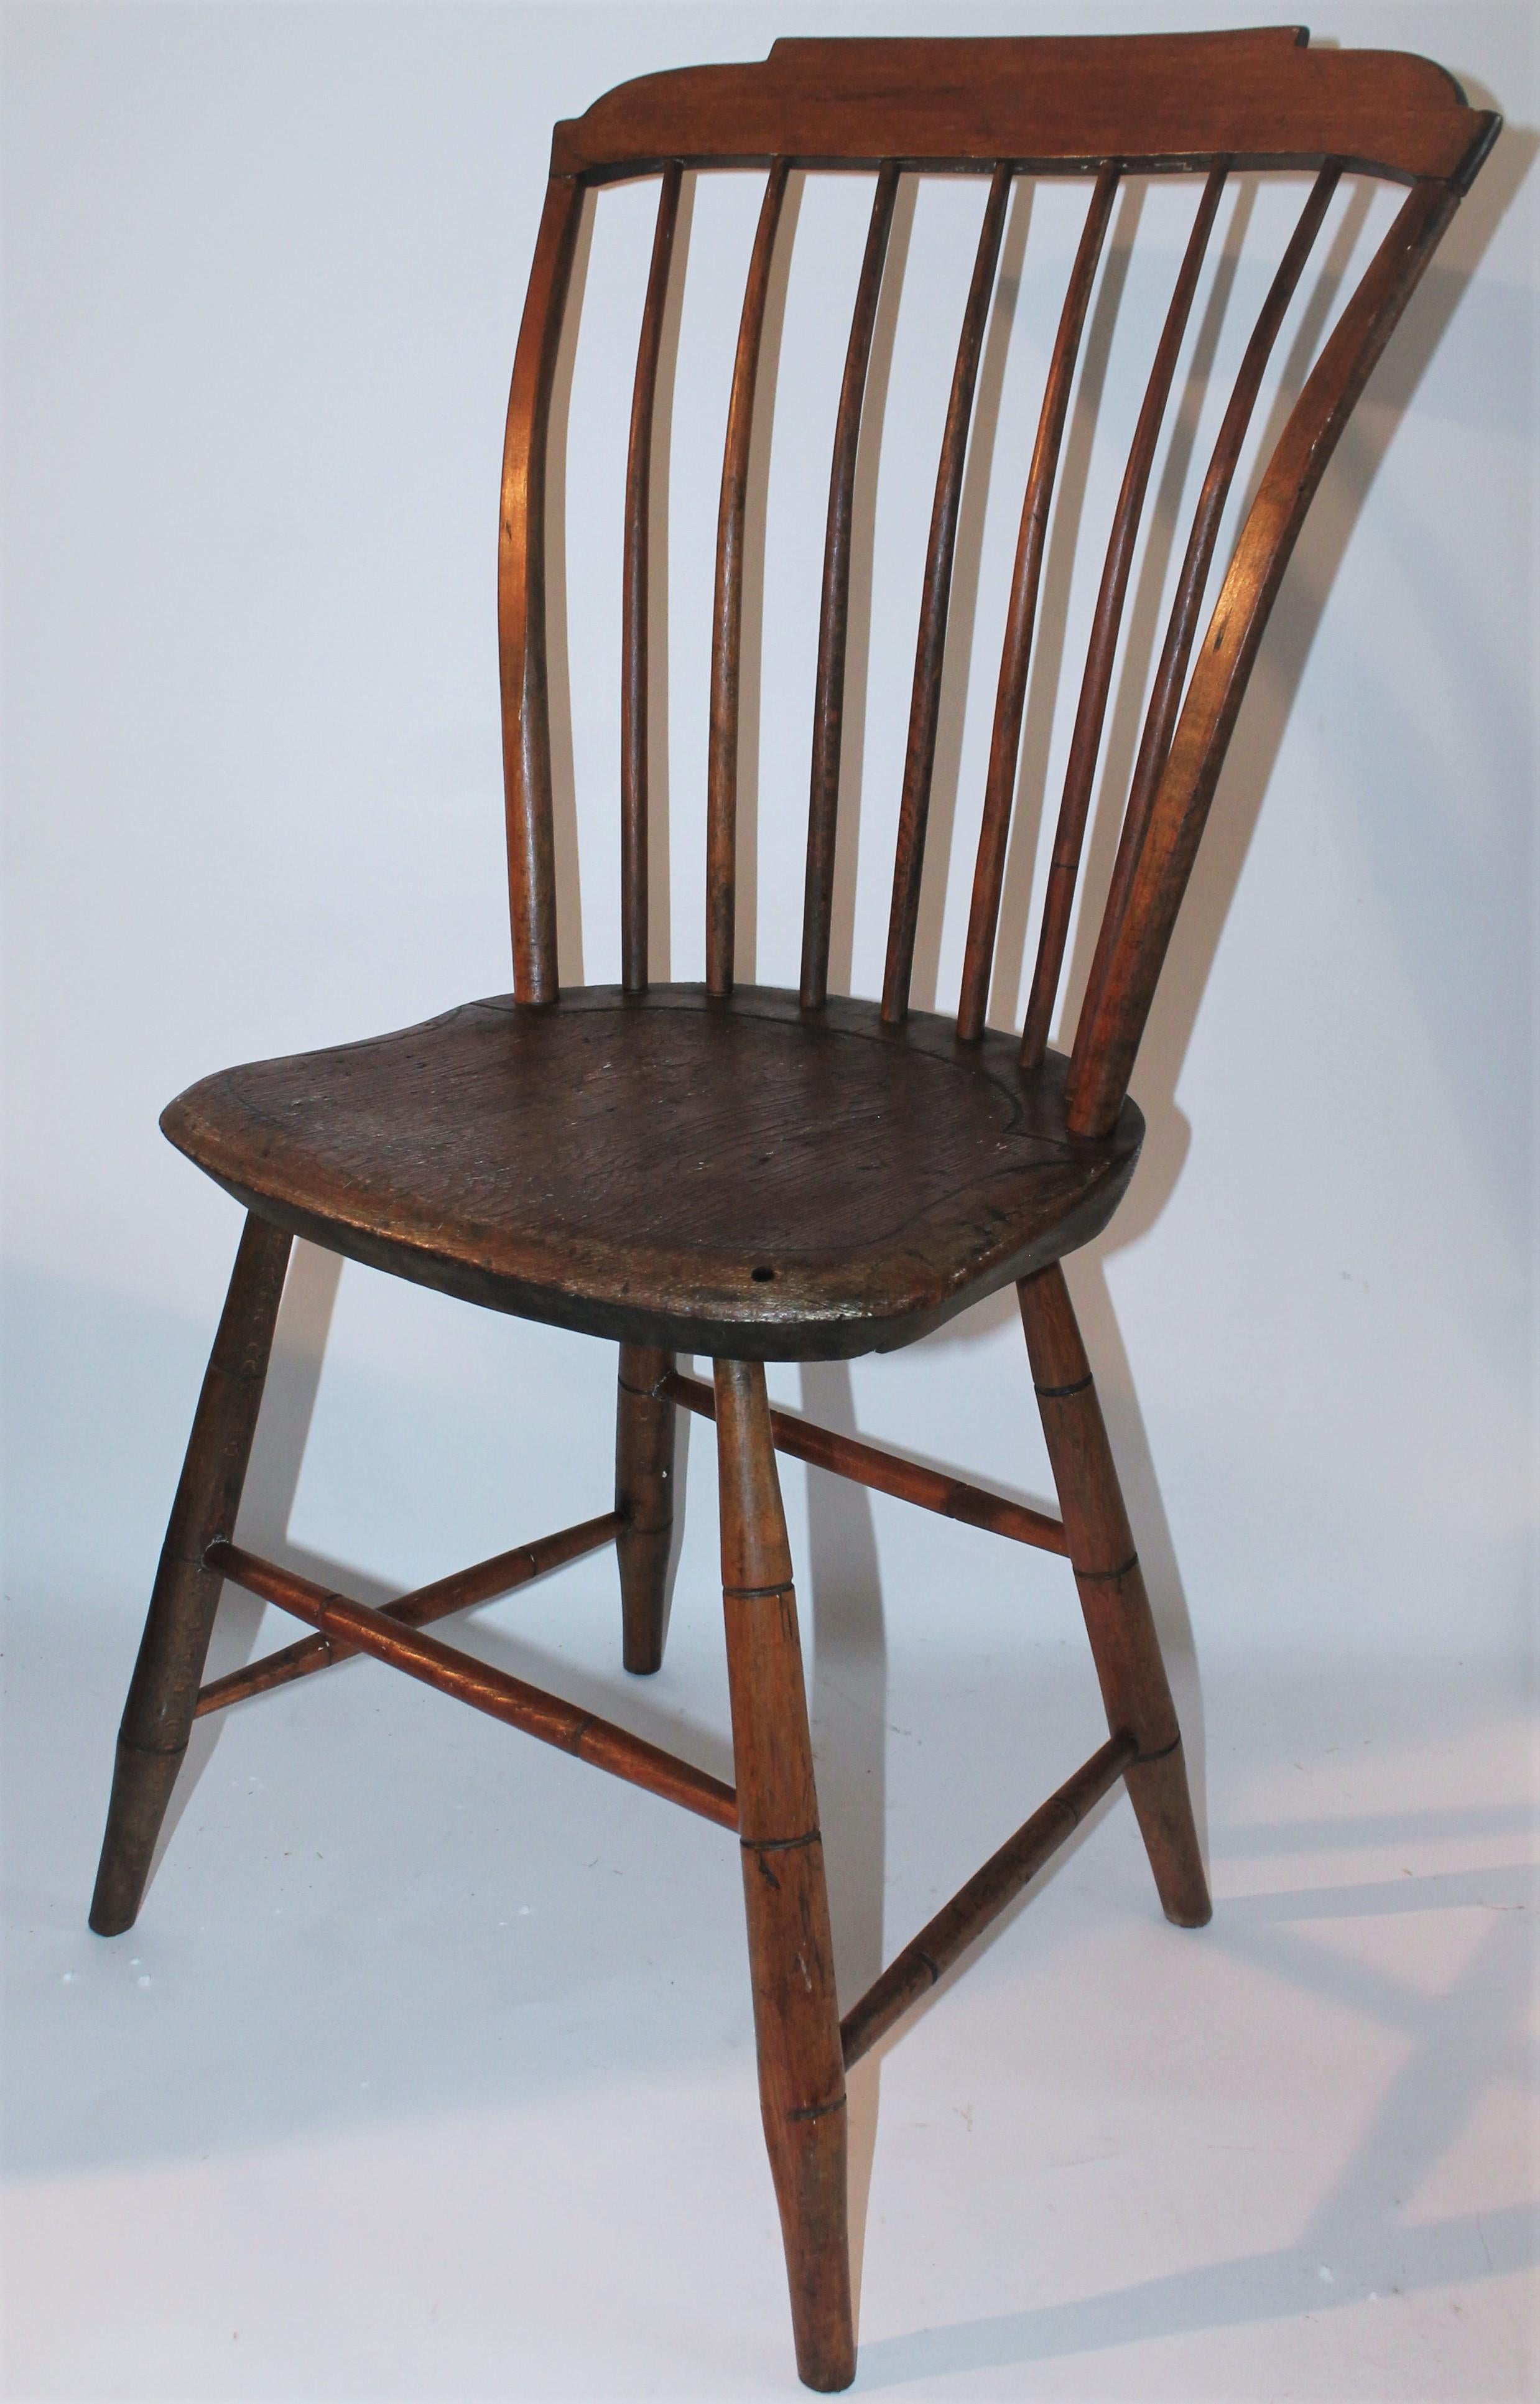 This fine bow back step down 18th century Windsor chair signed S,KILBURN ( maker ) on base of the chair. This chair is in good sturdy condition. Fantastic form and surface.